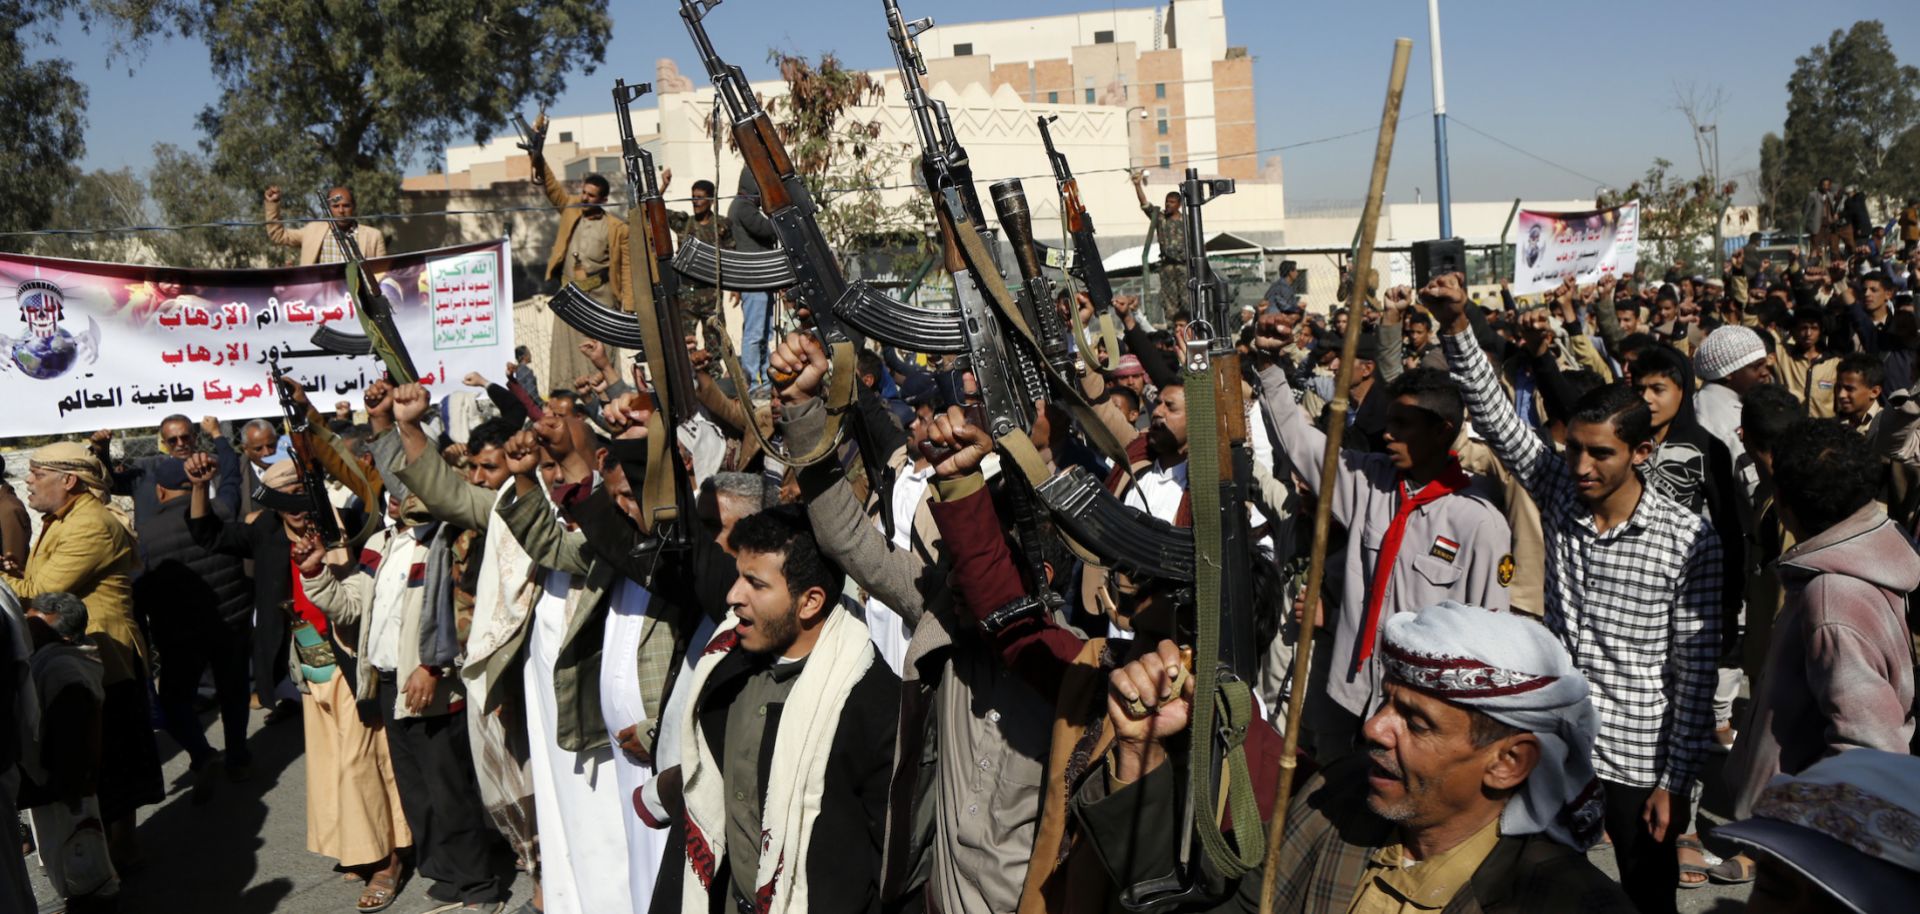 Houthi supporters hold up firearms as they protest the U.S. decision to designate the Houthi movement as a terrorist organization outside the closed American embassy on Jan. 18, 2021, in Sana'a, Yemen.  